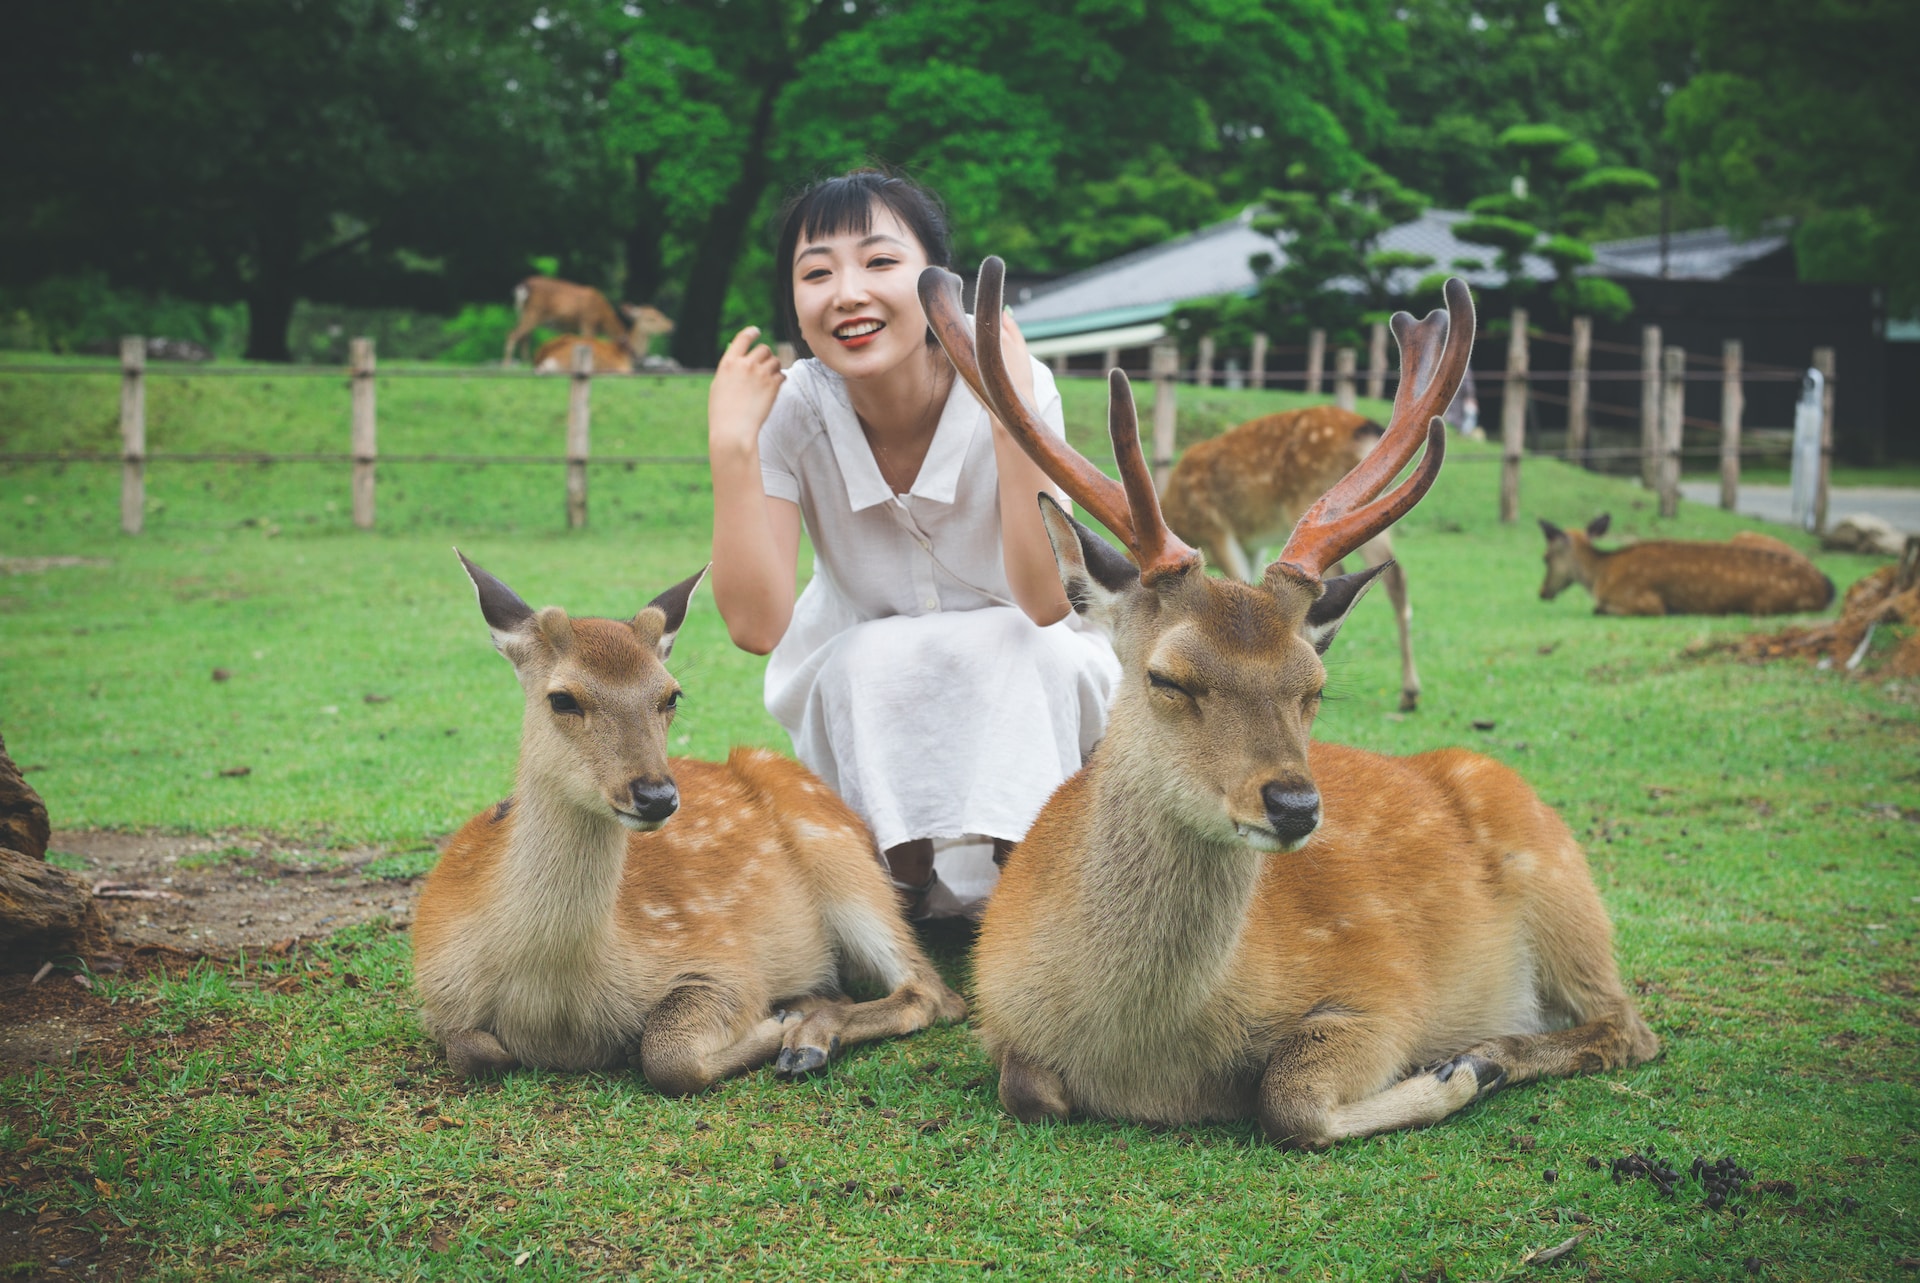 girl in white top smiling and sitting in greenery with deers